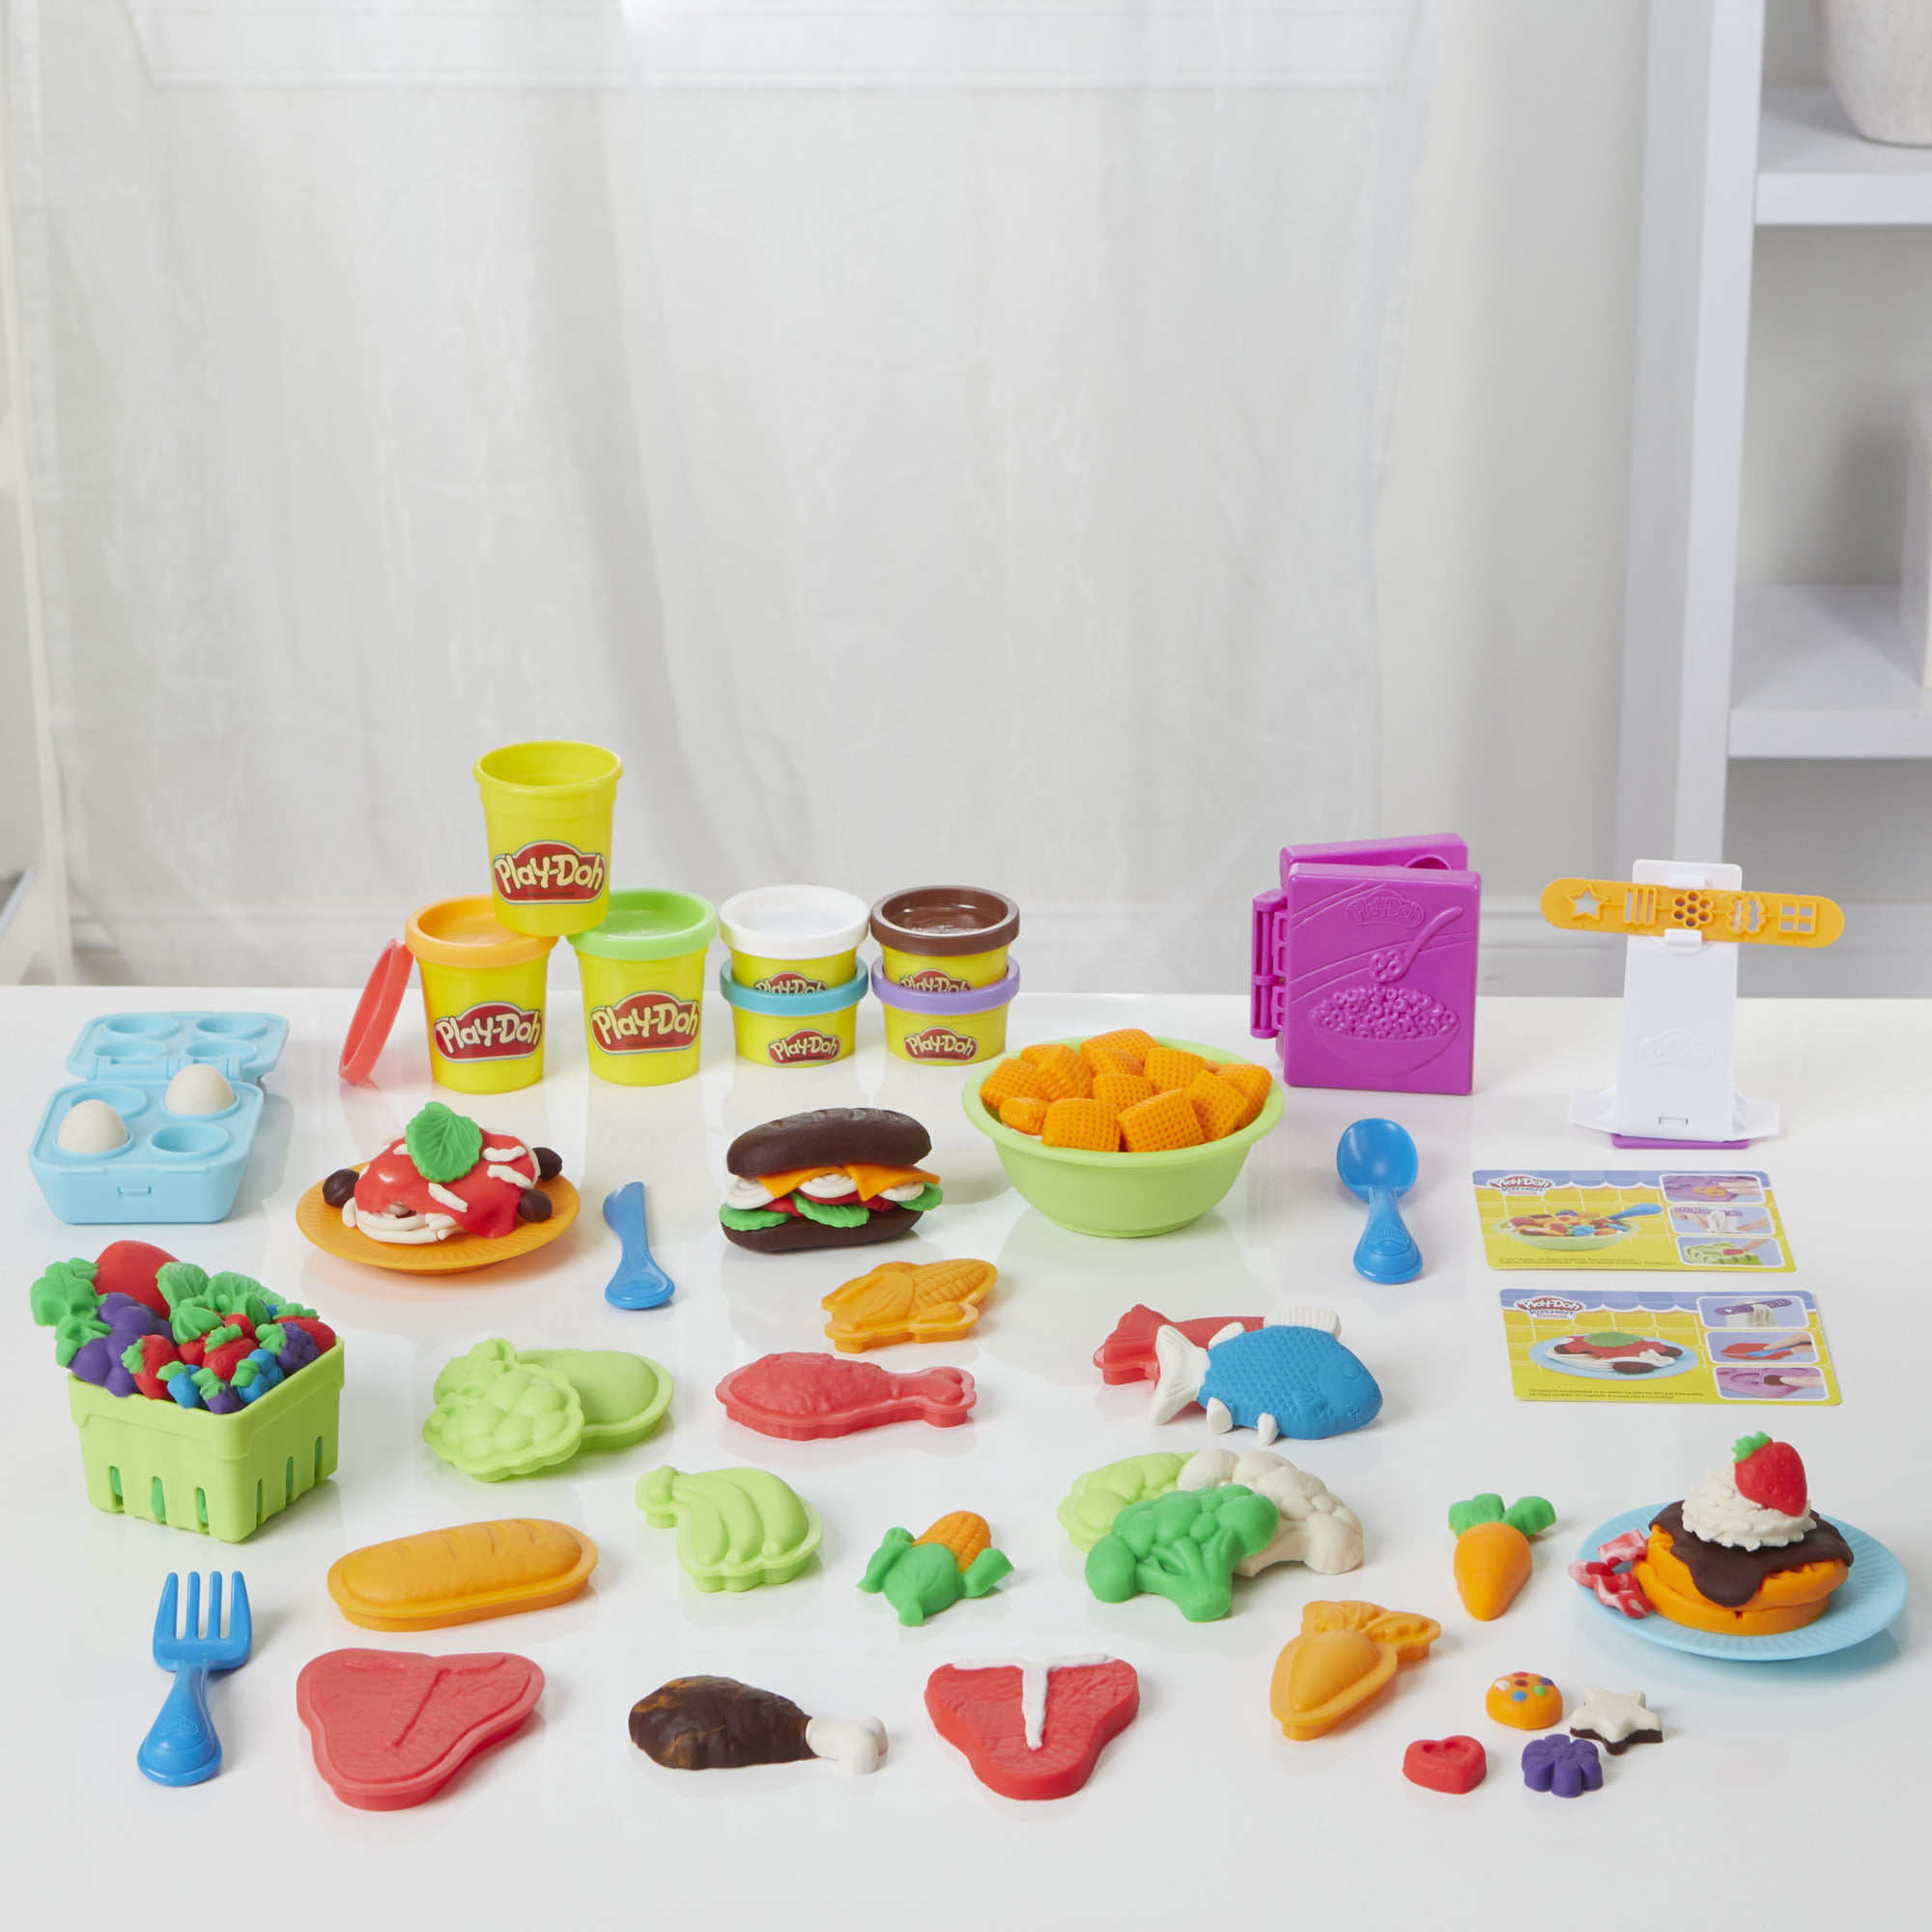 Play Doh Food Part 2 - Play Doh Candy Jar 